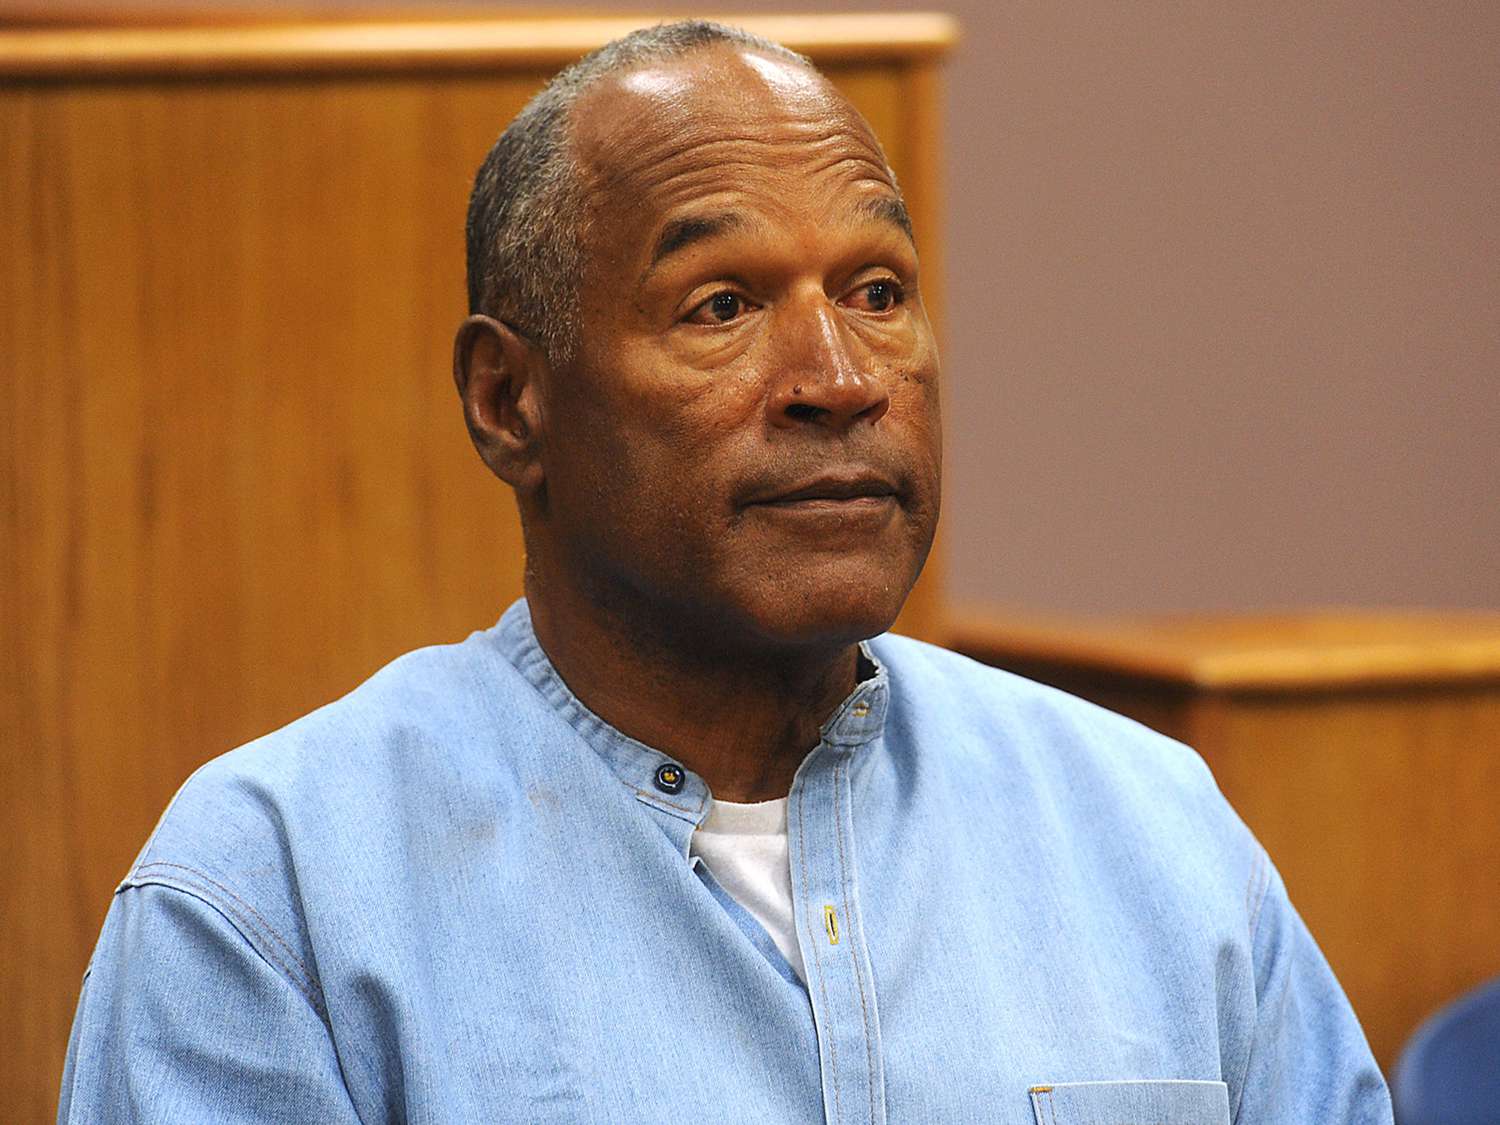 What Was O.J. Simpson’s Life Like After Acquittal? His Final Years Before Death [Video]